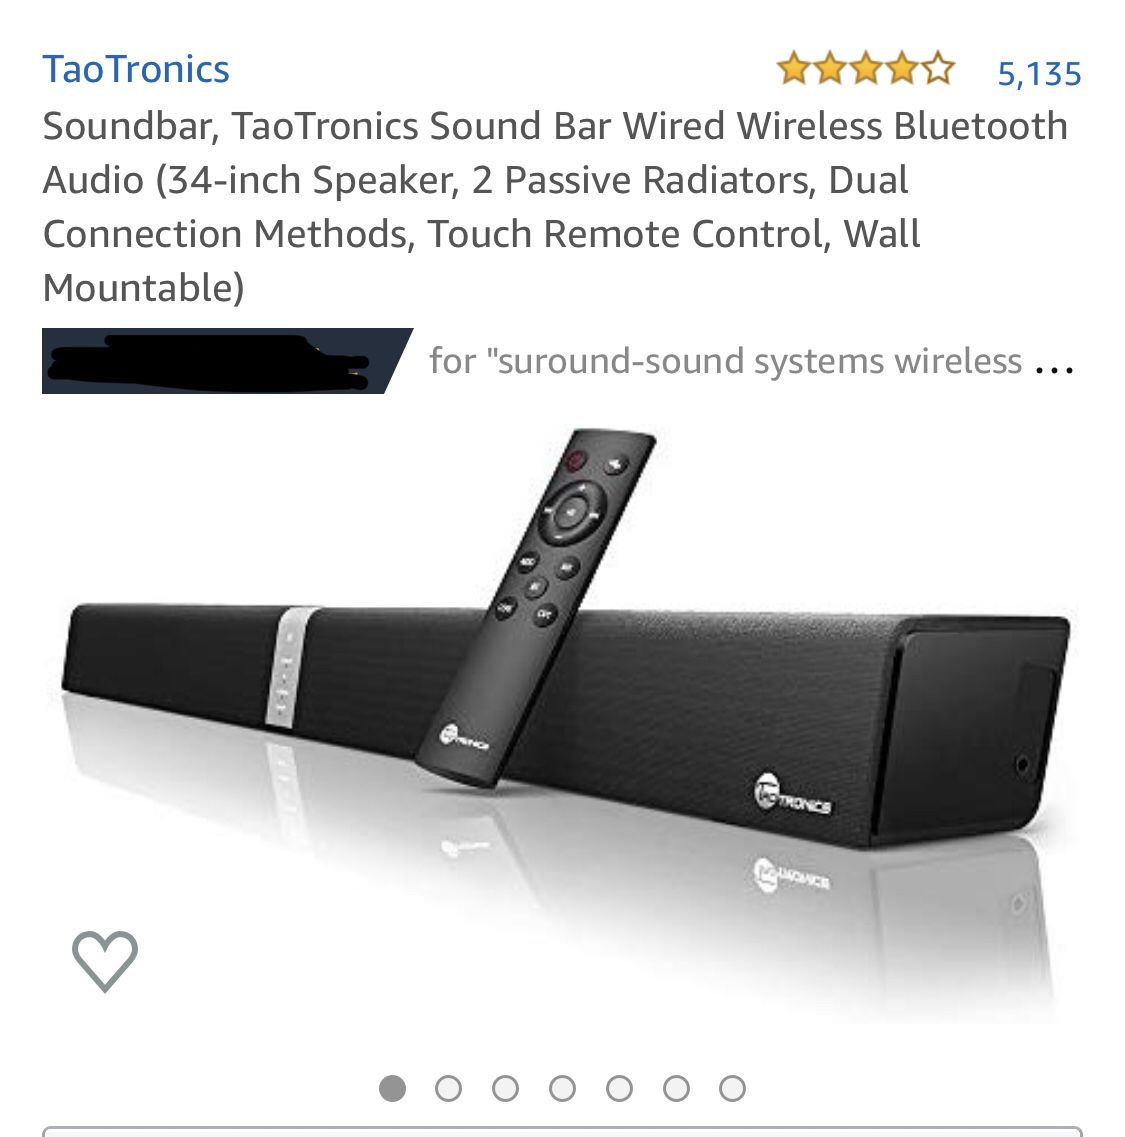 Soundbar , taotronic sound bar wireless Bluetooth audio 34 inch speaker, 2 passive radiators, dual connection methods, touch remote control, wall mou